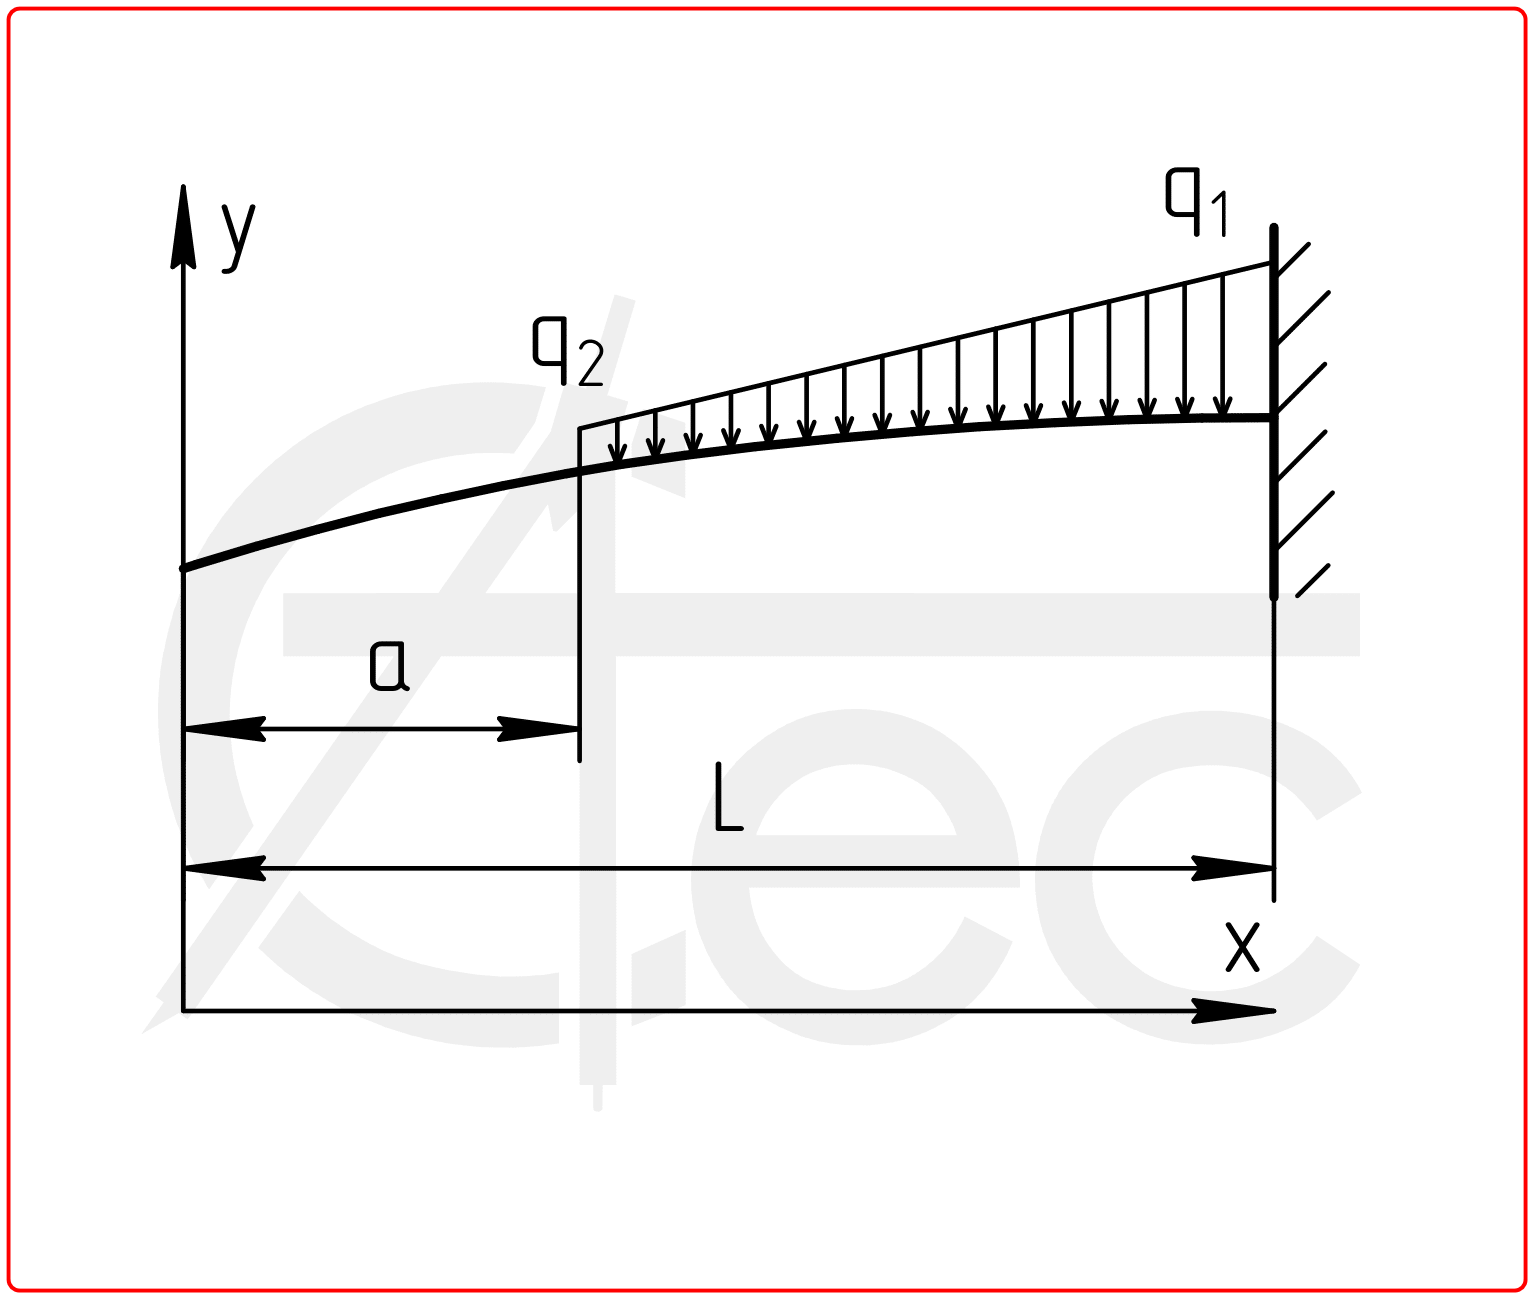 Cantilever beam under distributed load